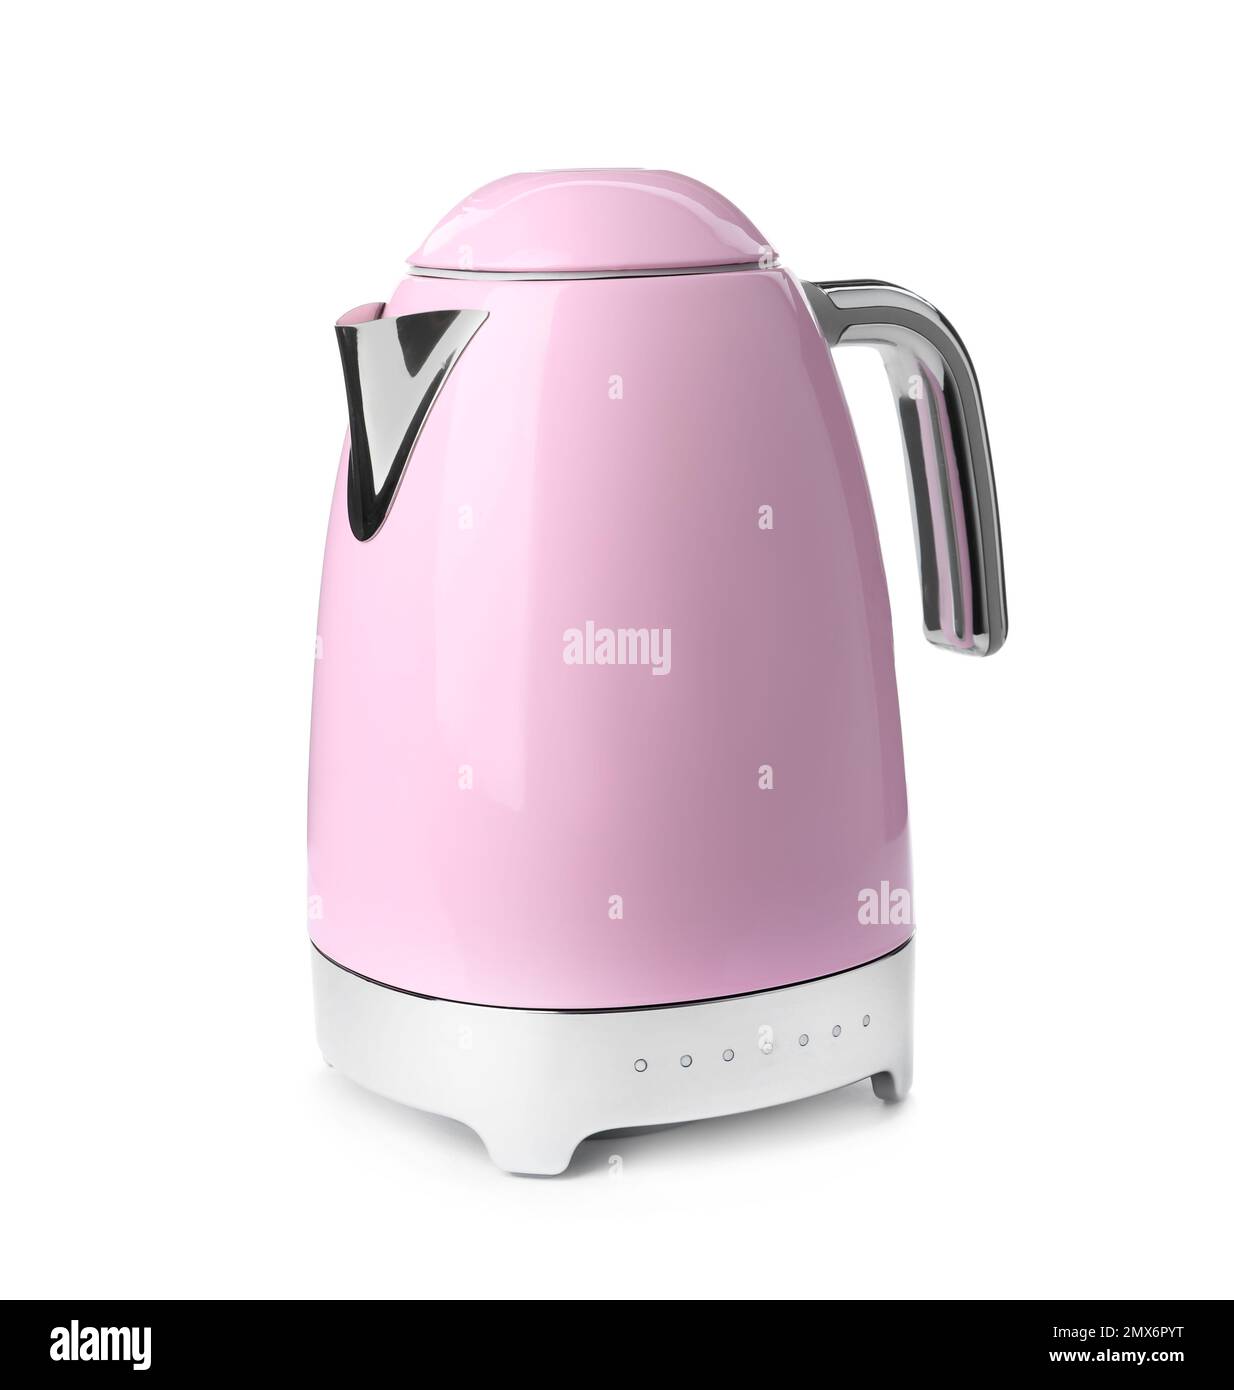 https://c8.alamy.com/comp/2MX6PYT/modern-pink-electric-kettle-with-base-isolated-on-white-2MX6PYT.jpg